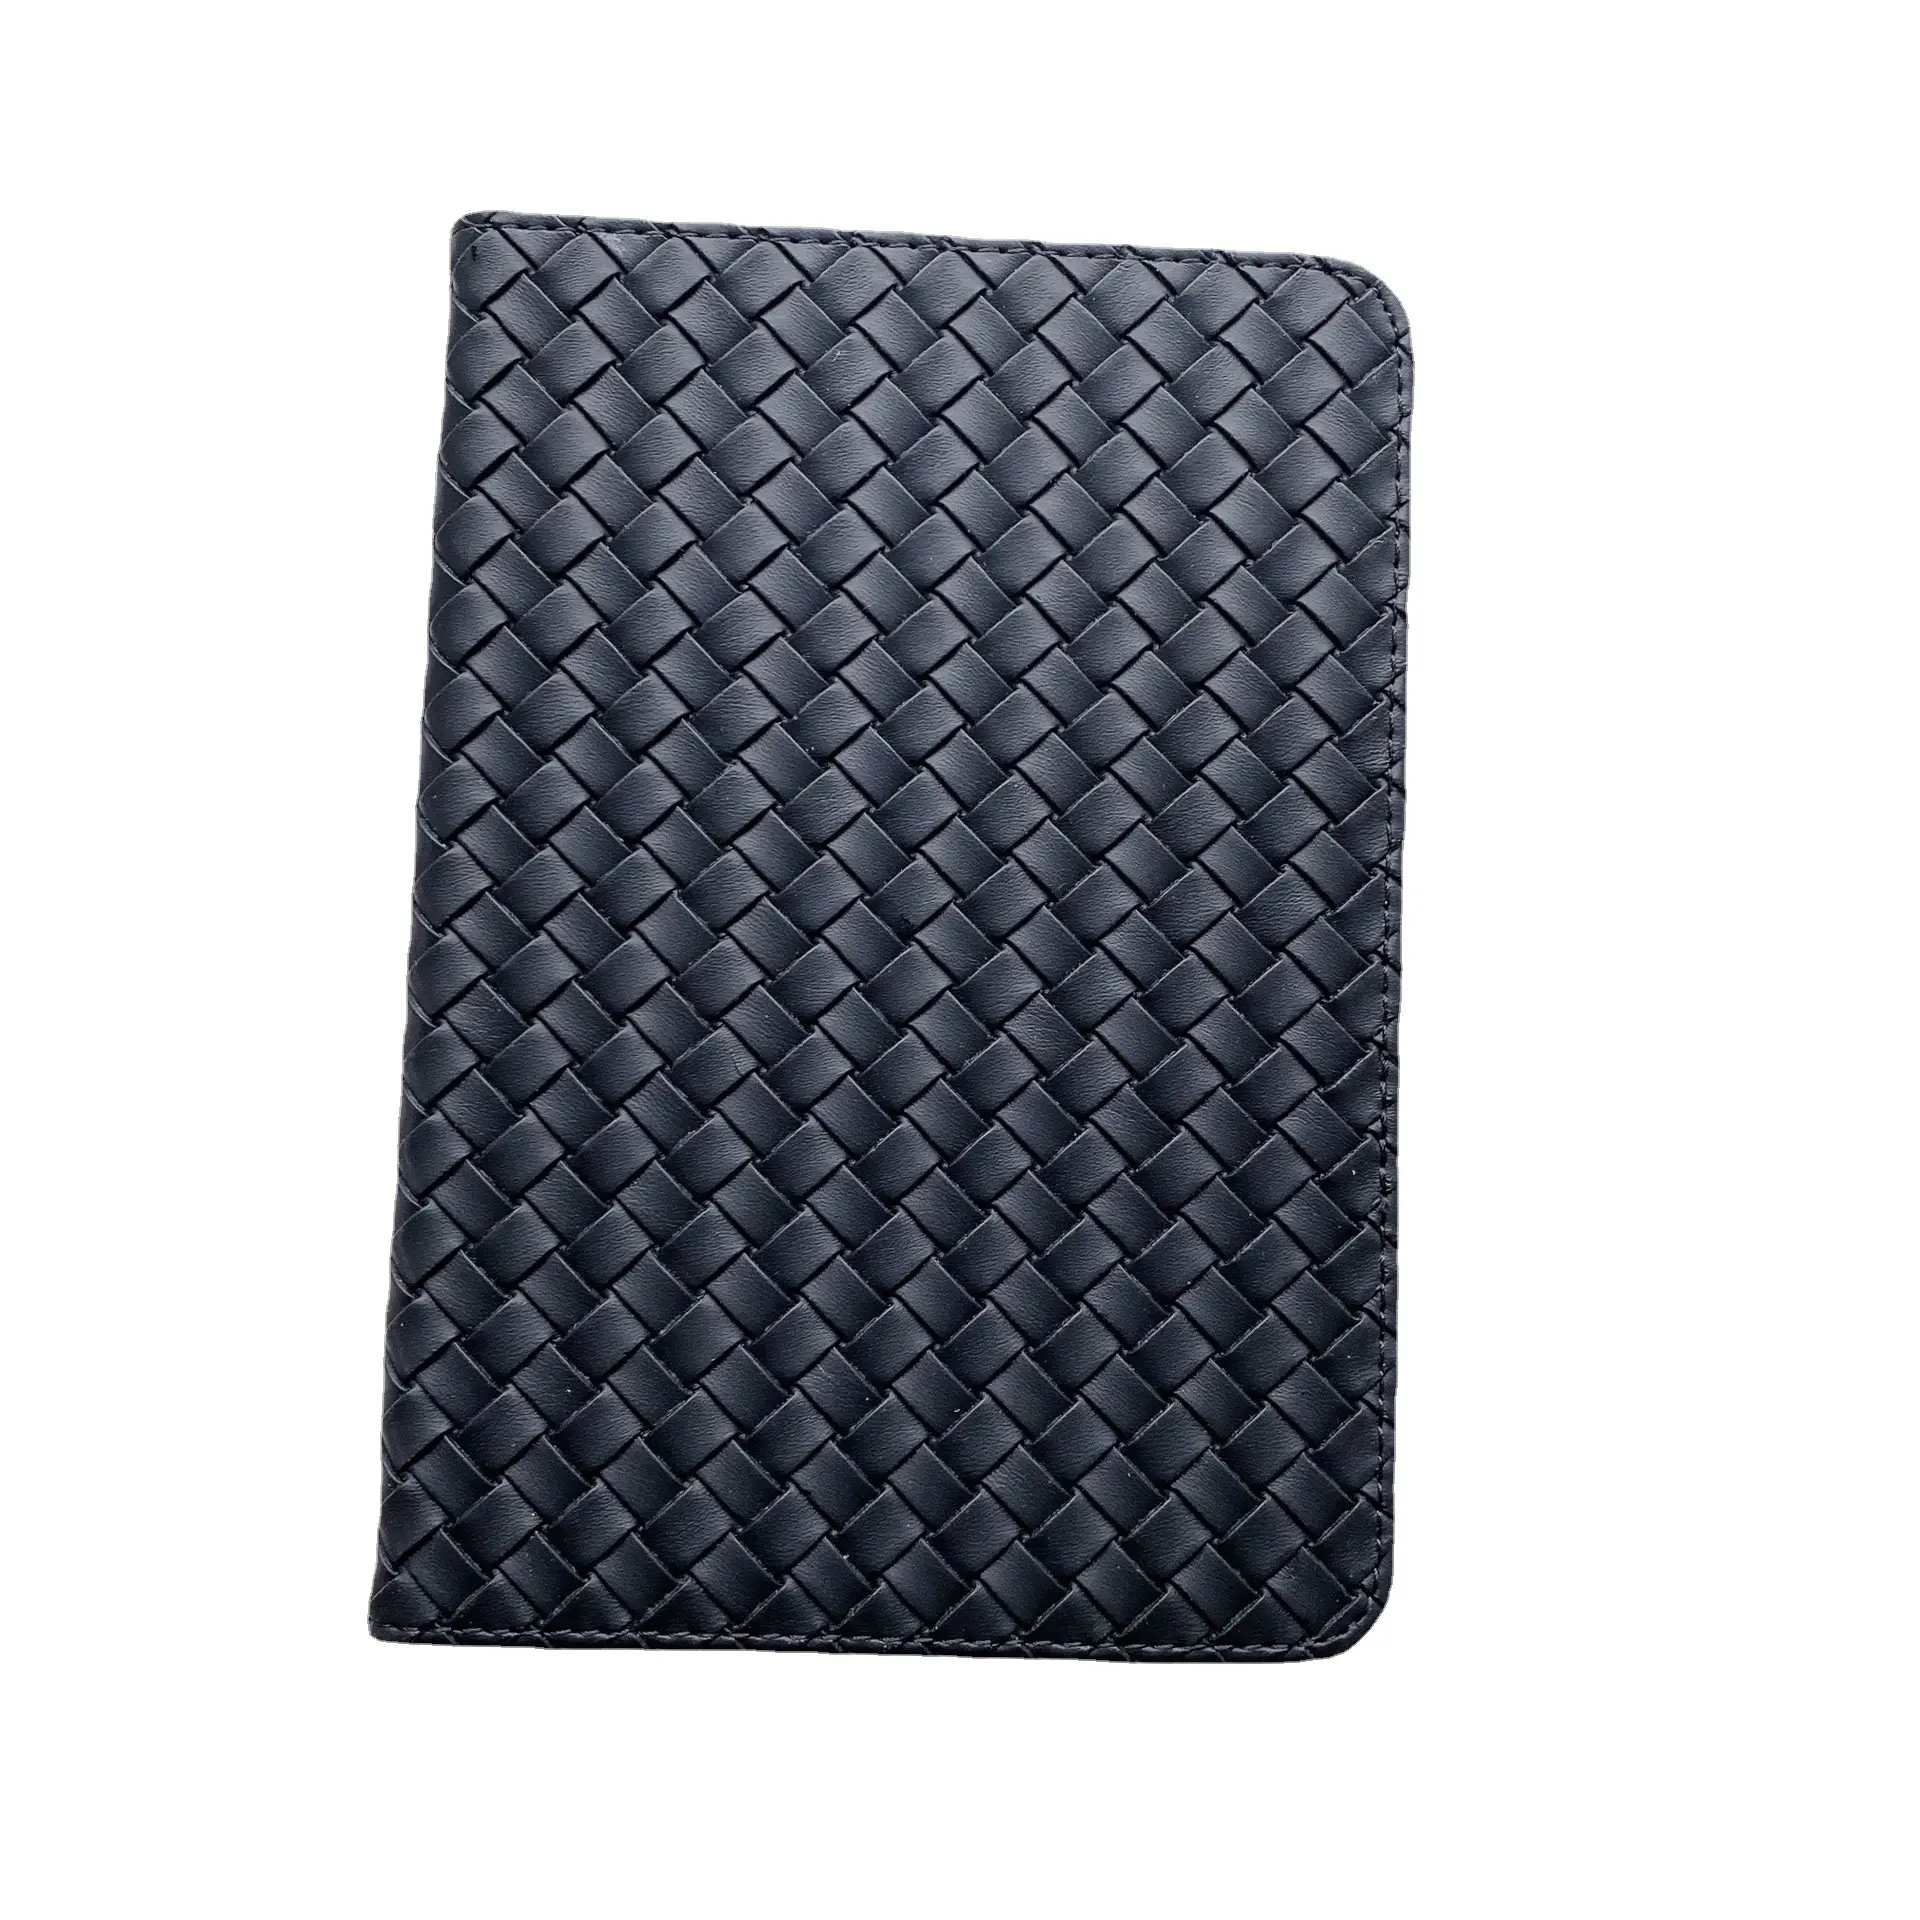 The new braided pattern is suitable for the new 2022 ipad case air5 "trend flat screen case